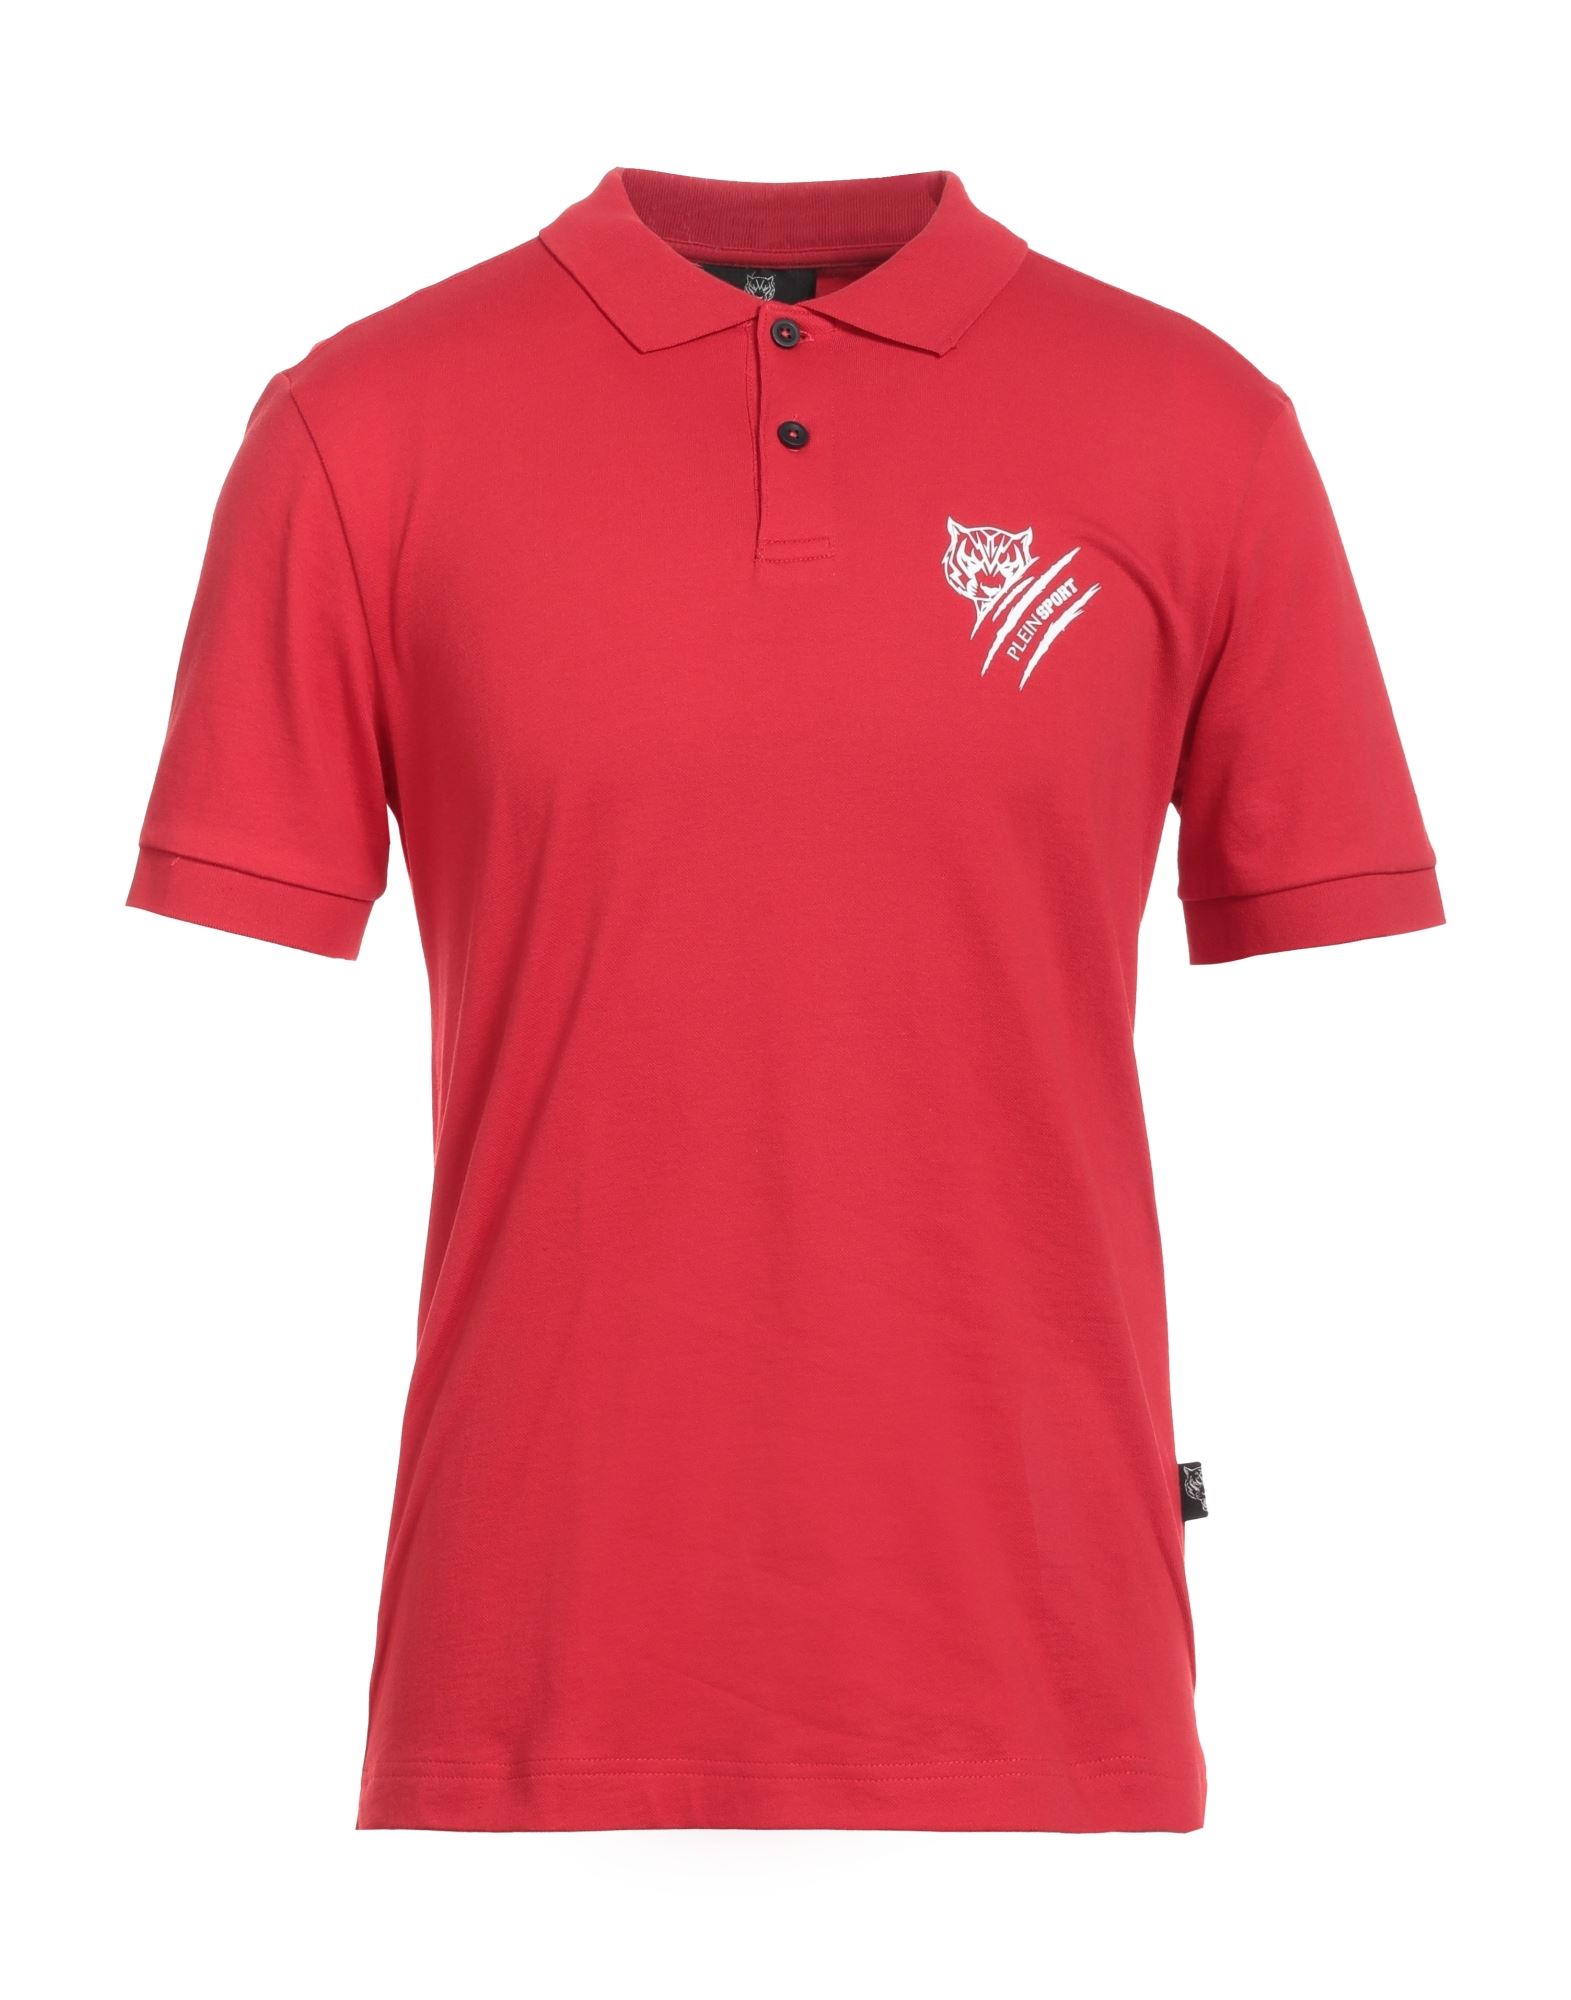 Plein Sport Polo Shirts In Red